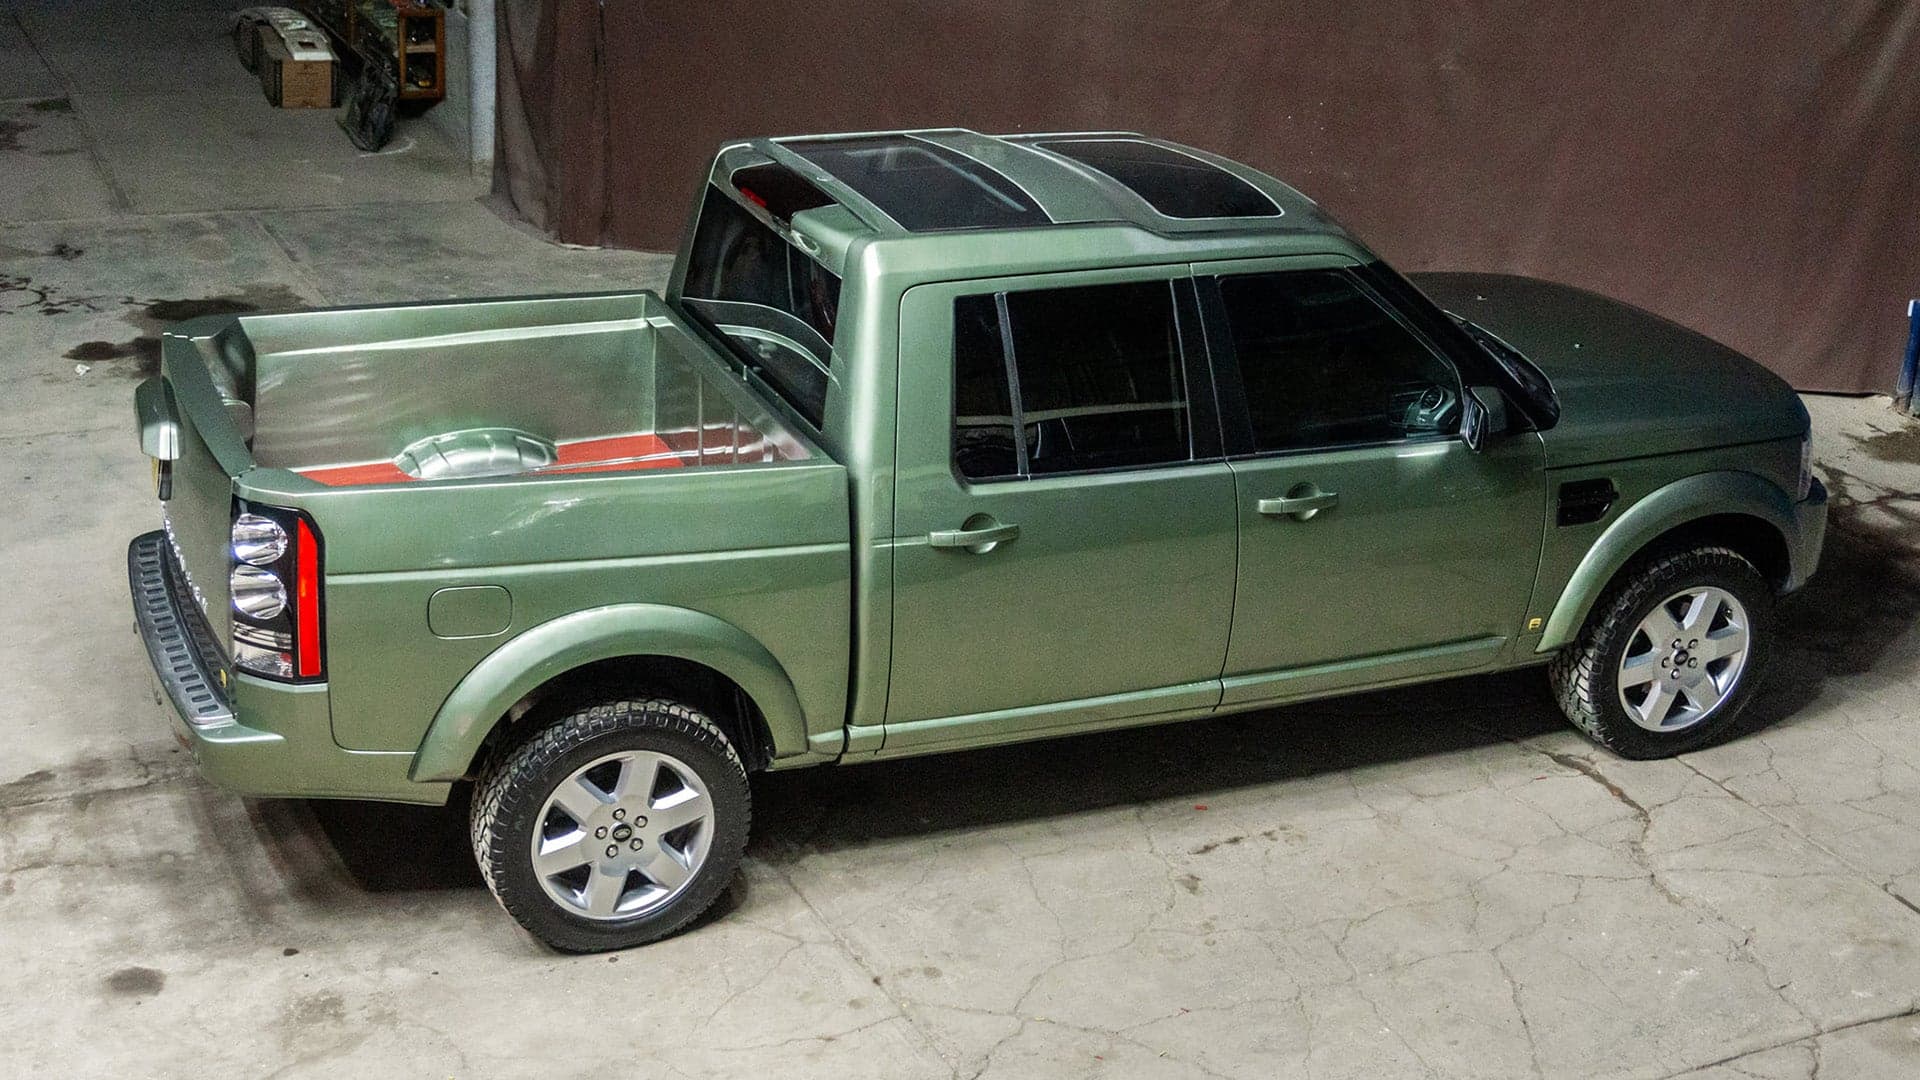 A Land Rover Discovery Pickup Is the Midsize Truck We Really Need